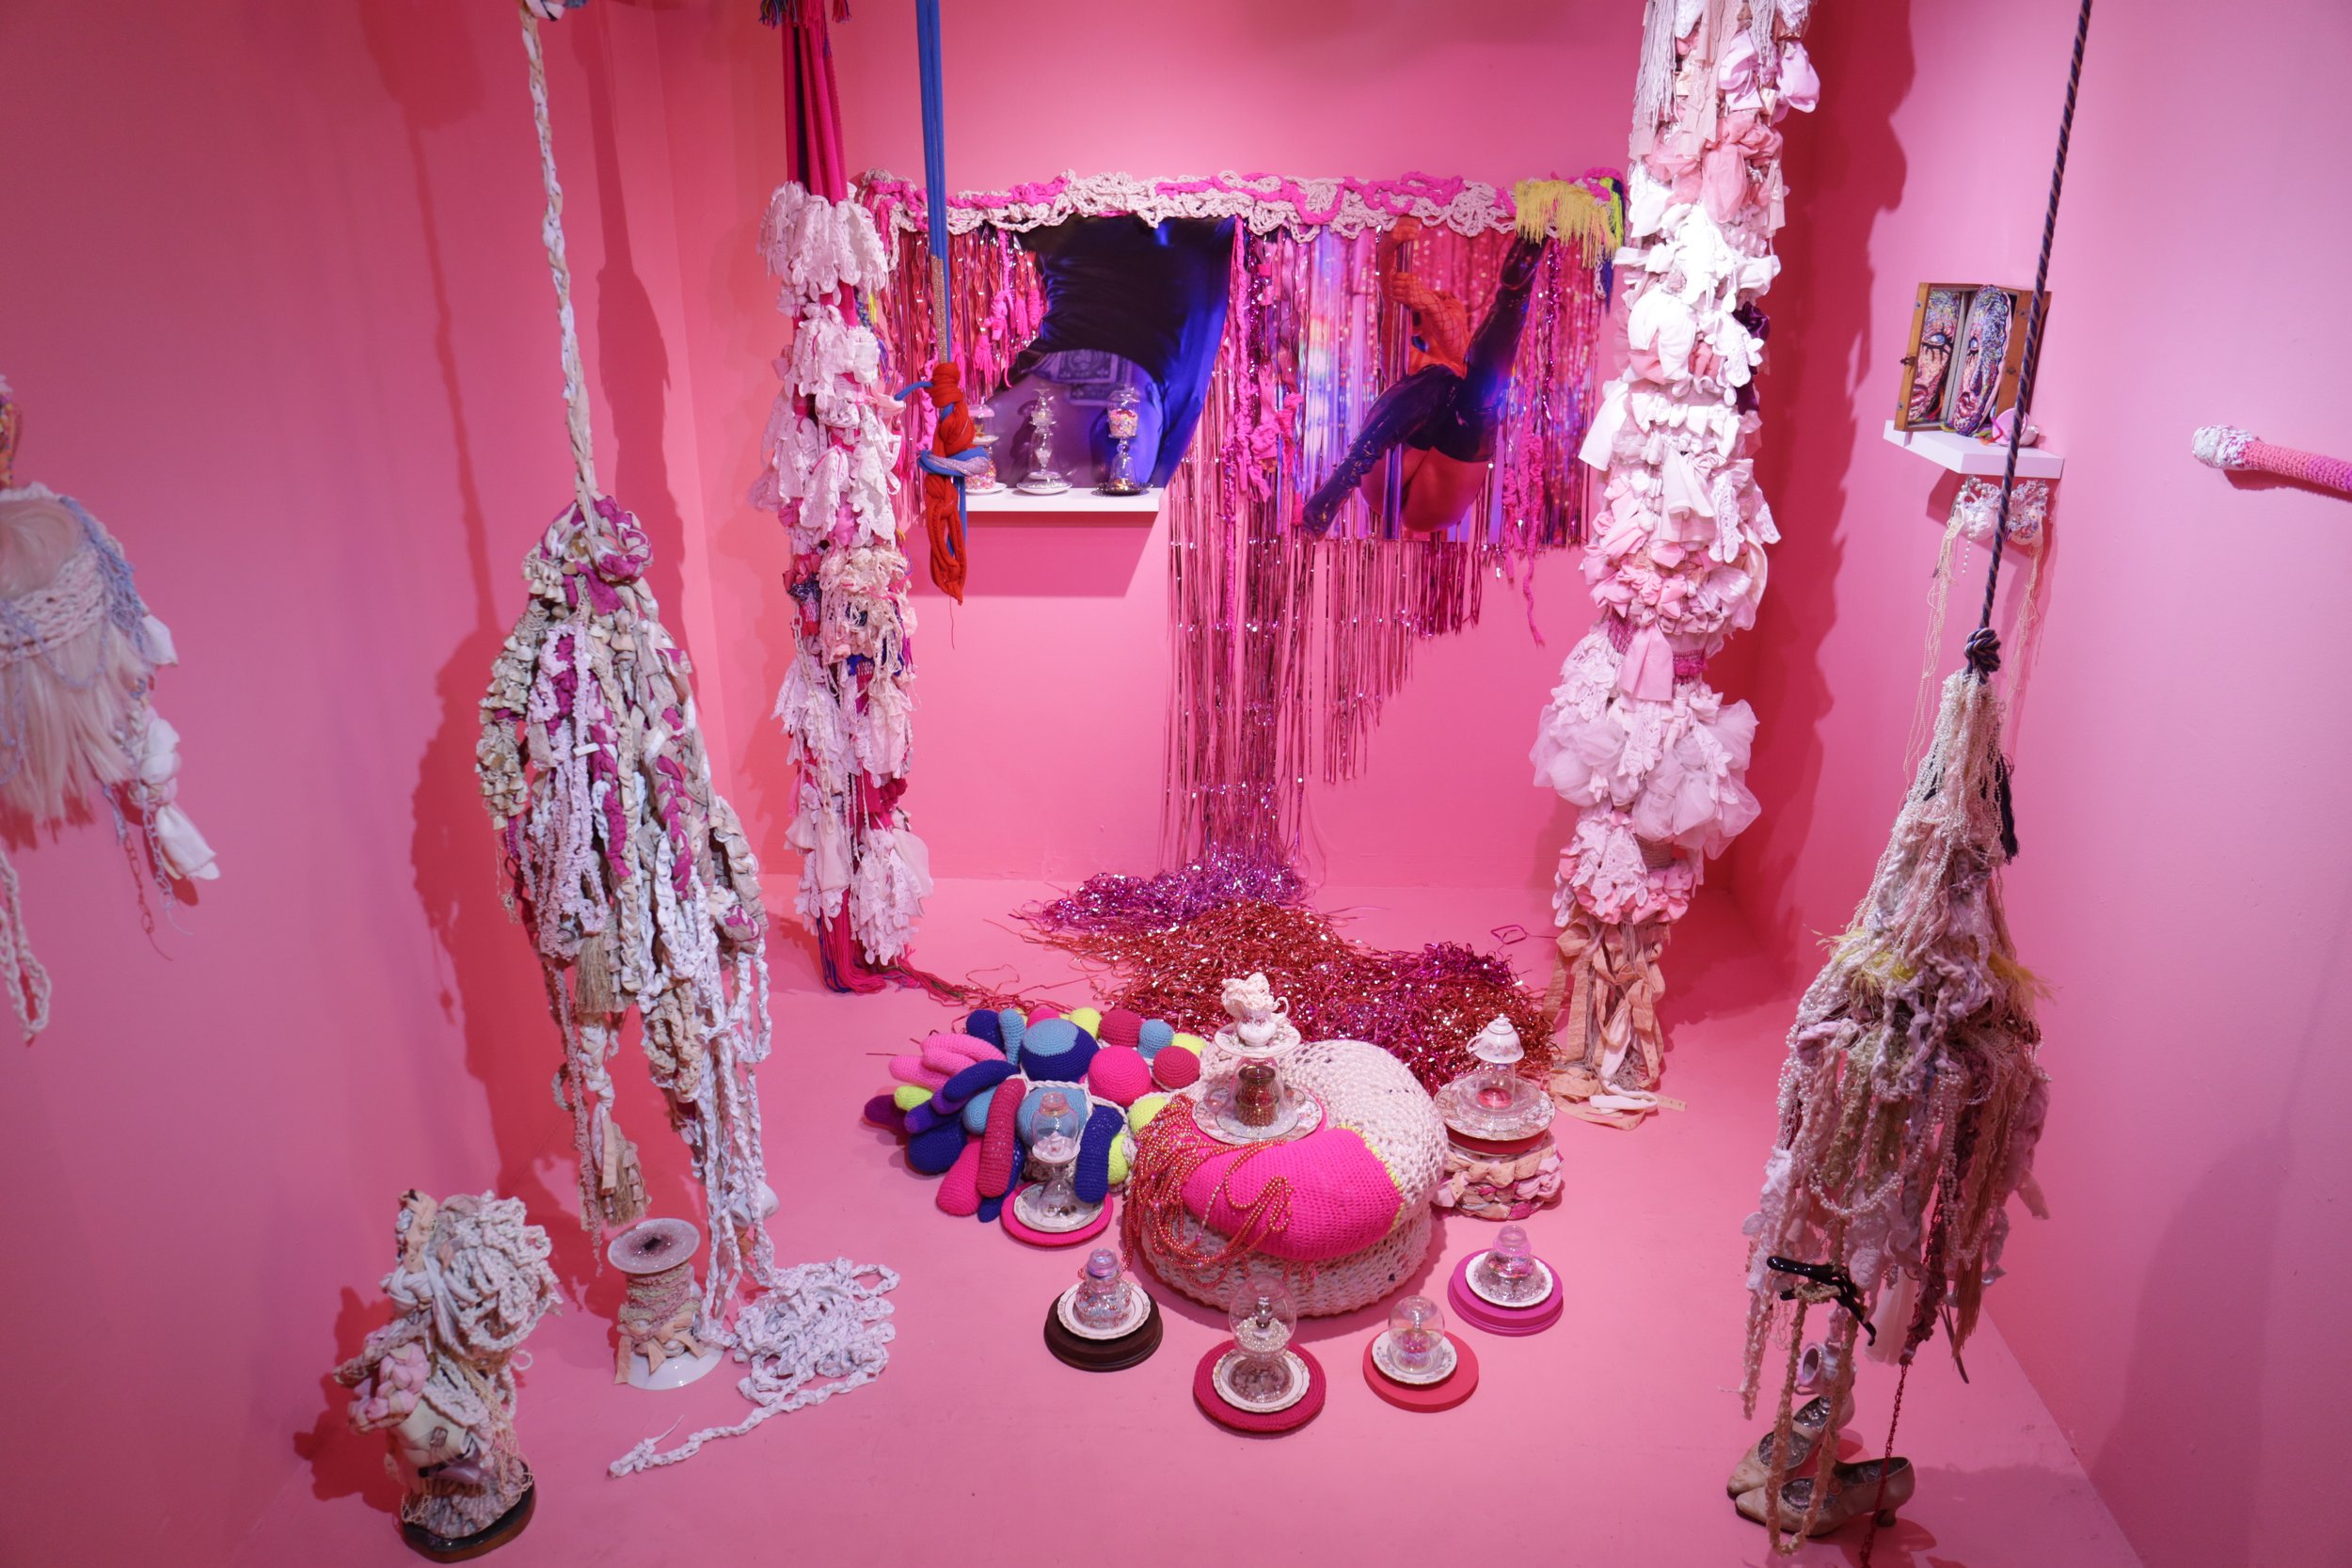  Different Natures is an immersive installation where the aesthetics delineated toward femininity - femininity meaning a state of being not exclusive to one sex or another - may be explored and witnessed by an audience. Its premise is conceptually ba